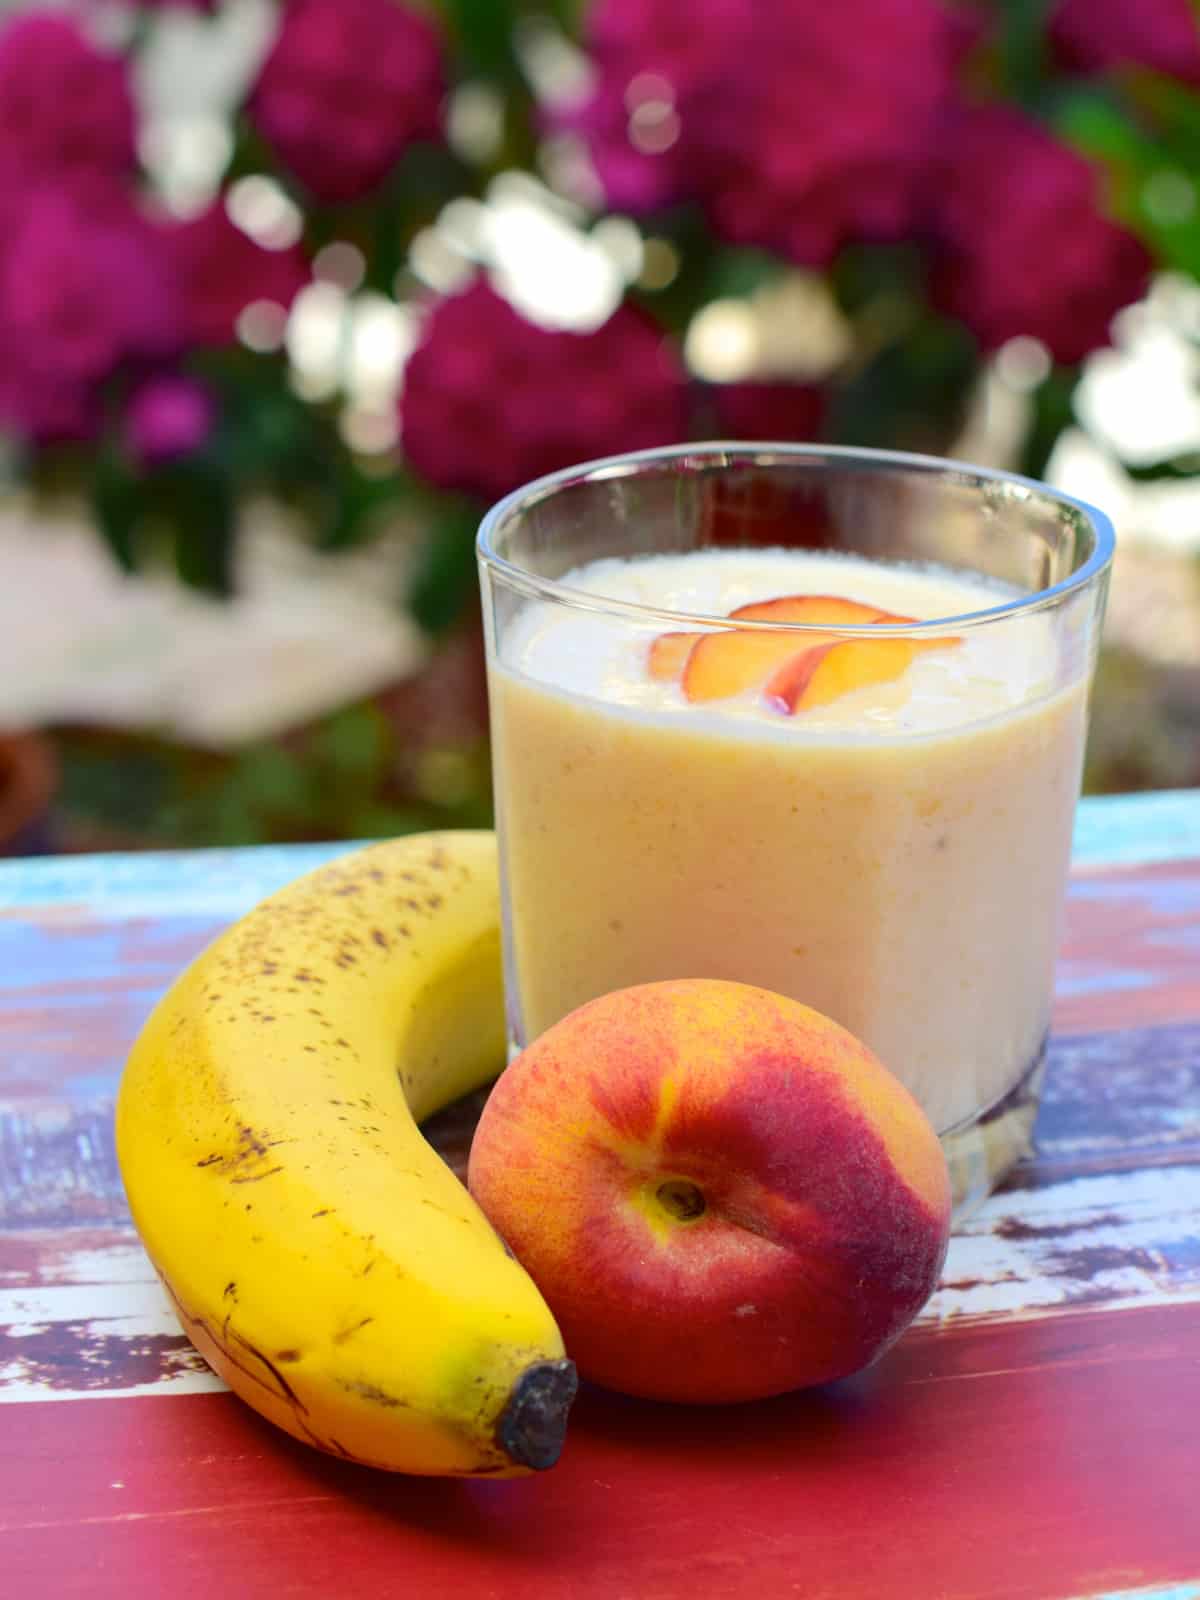 banana peach smoothie in a glass cup garnished fresh peach pieces